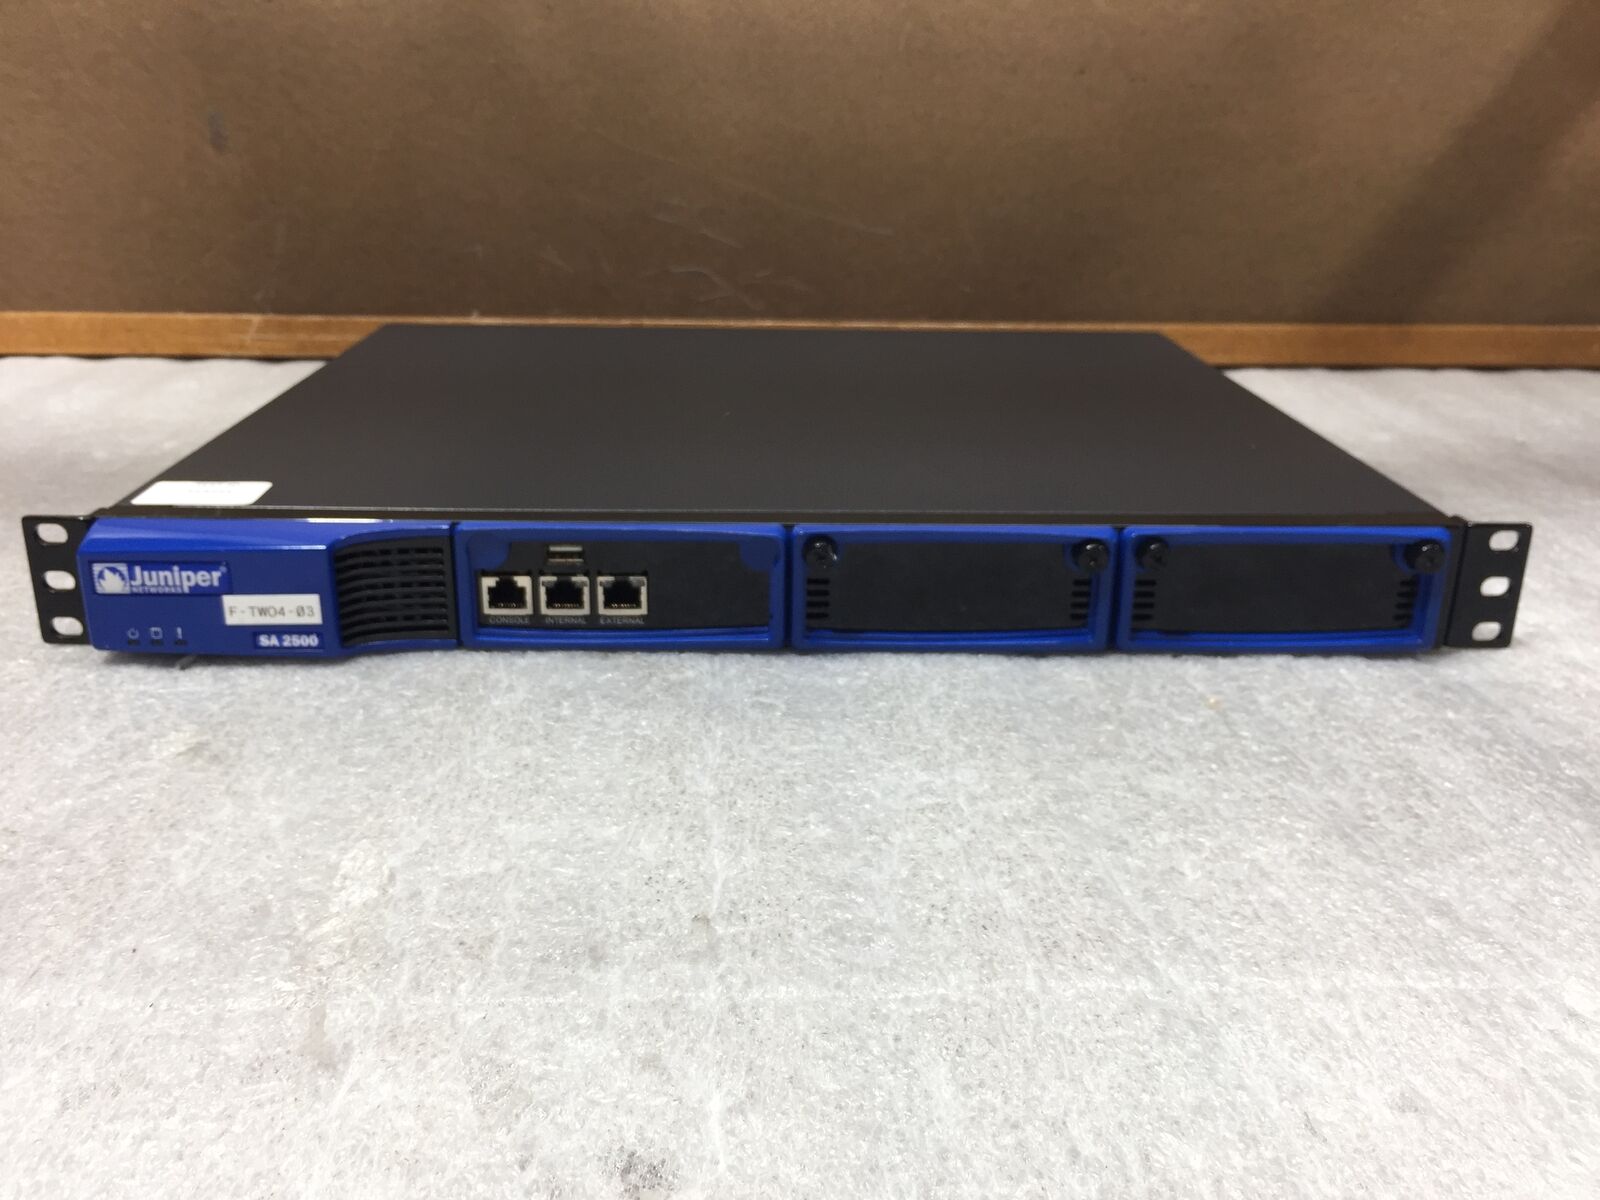 Juniper Networks SA 2500 Gigabit VPN Security Appliance, Tested and Working